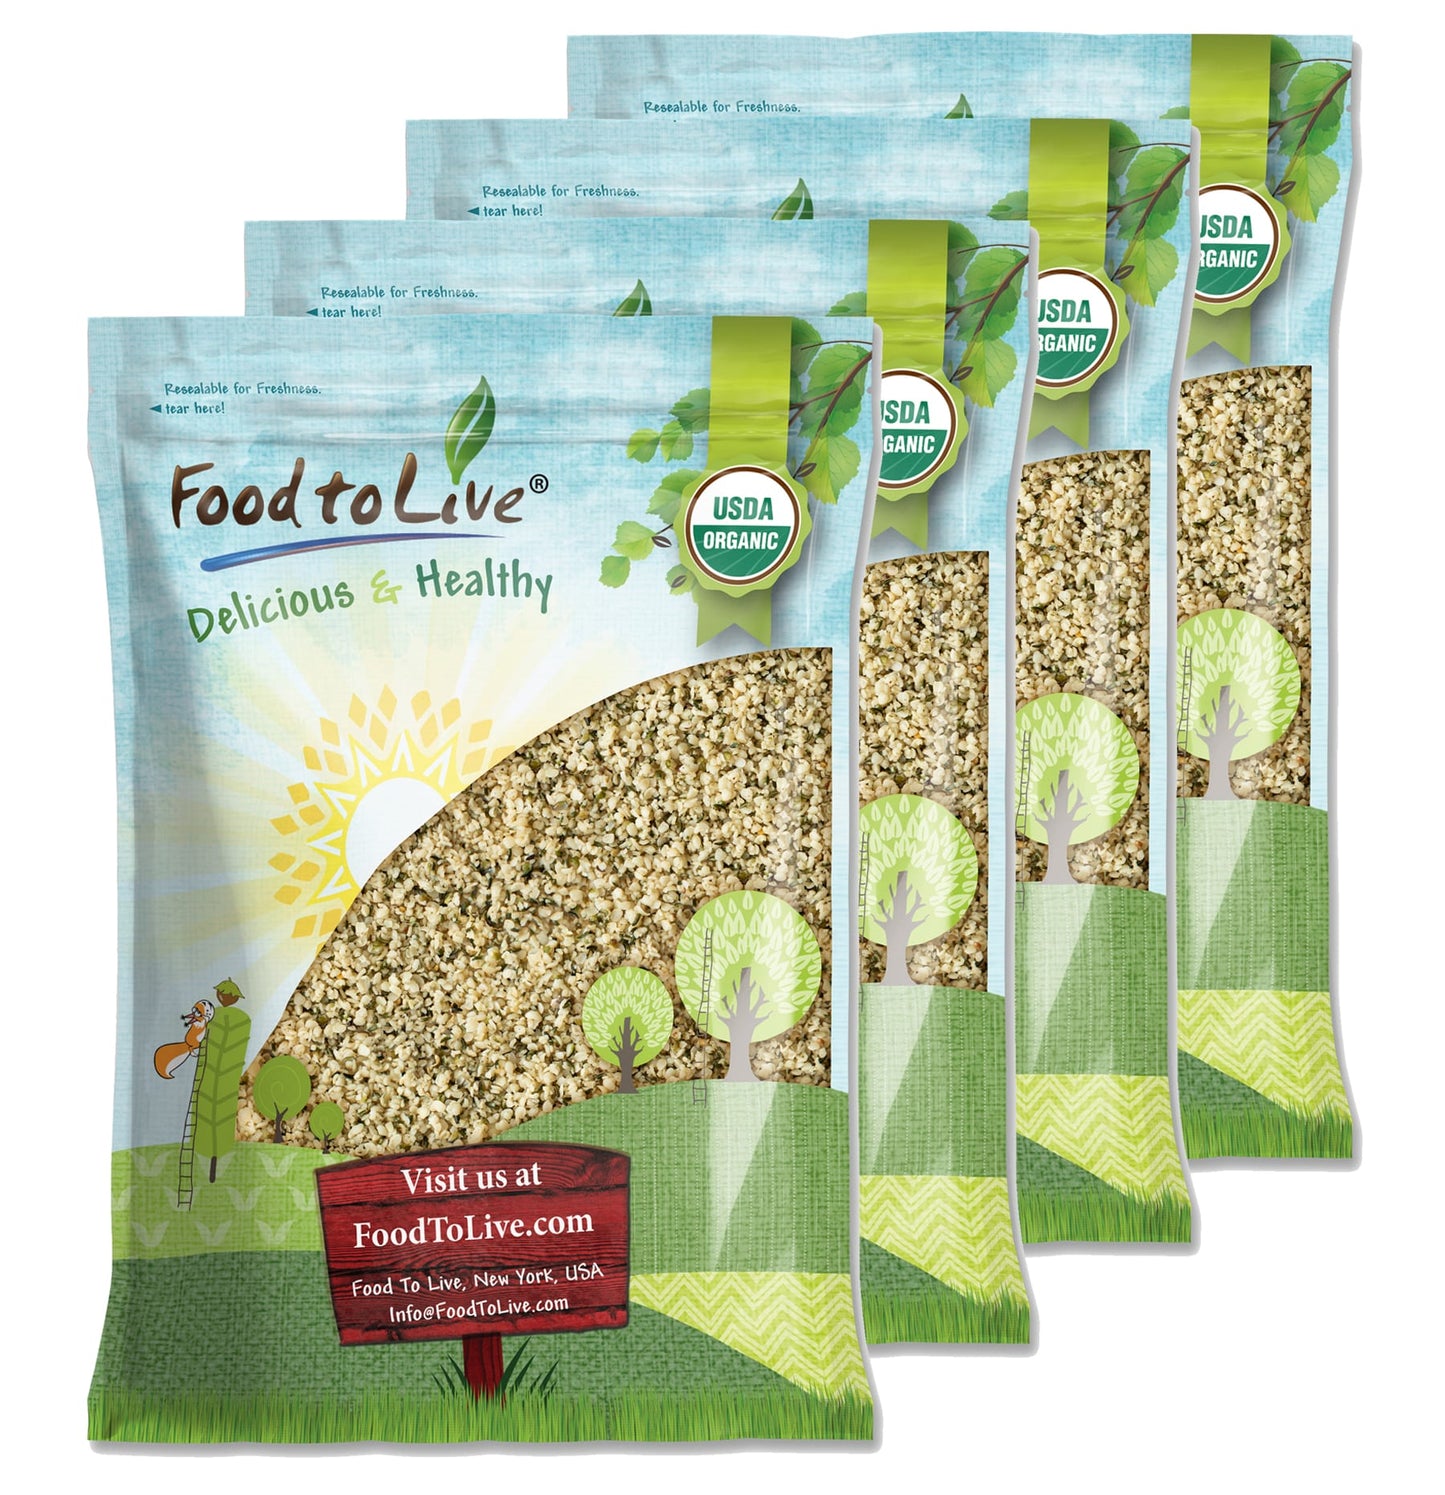 Organic Hemp Seeds - Non-GMO Raw Hearts, Hulled, Shelled, Kosher, Vegan, Bulk, Rich in Omega 3 & 6, Low Carb, Low Sodium, Good Source of Protein & Iron, Great for Oatmeal, Product of China